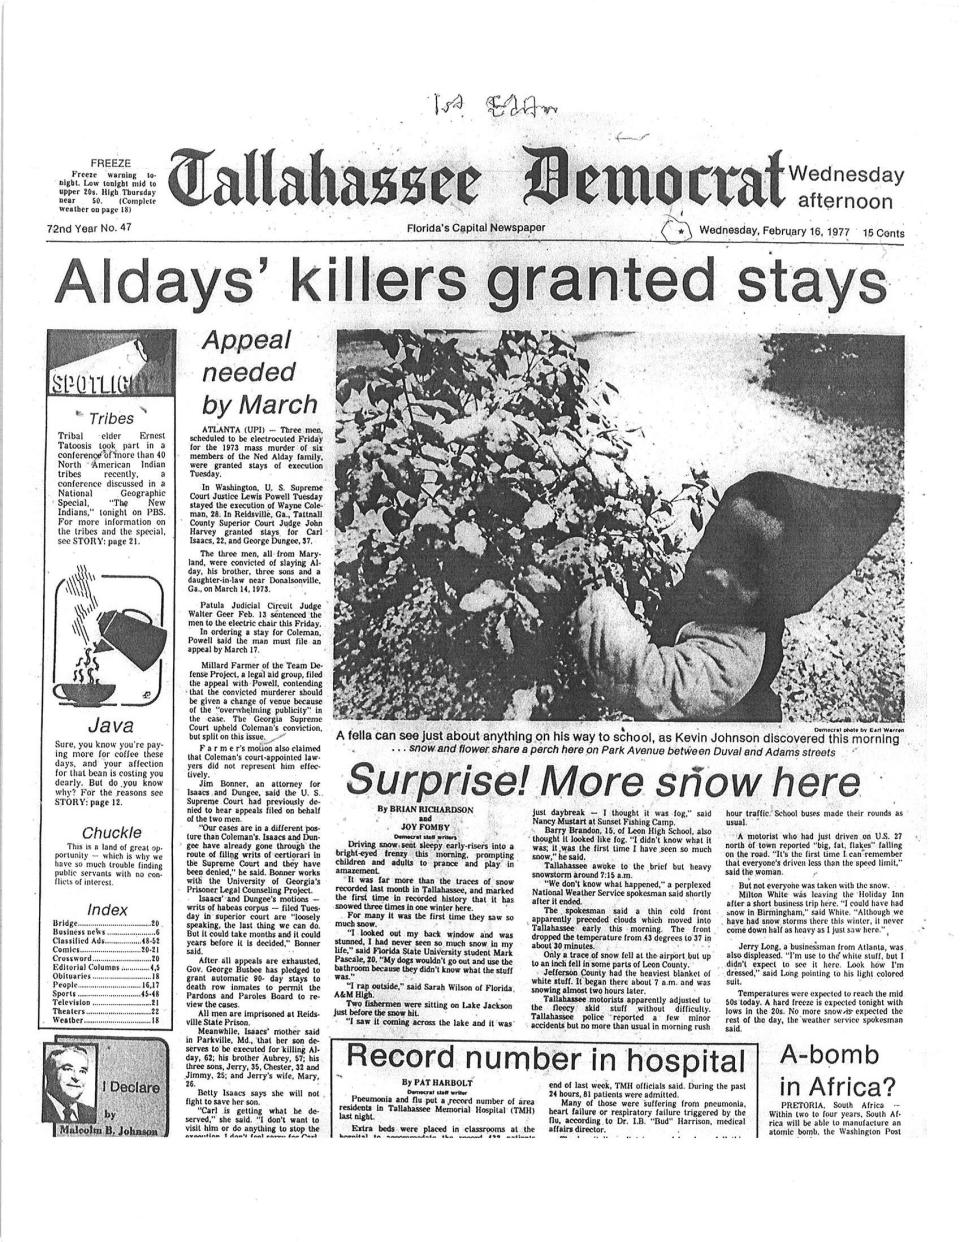 The front page from the Tallahassee Democrat on Feb. 16, 1977, shows the snow fall from that morning.